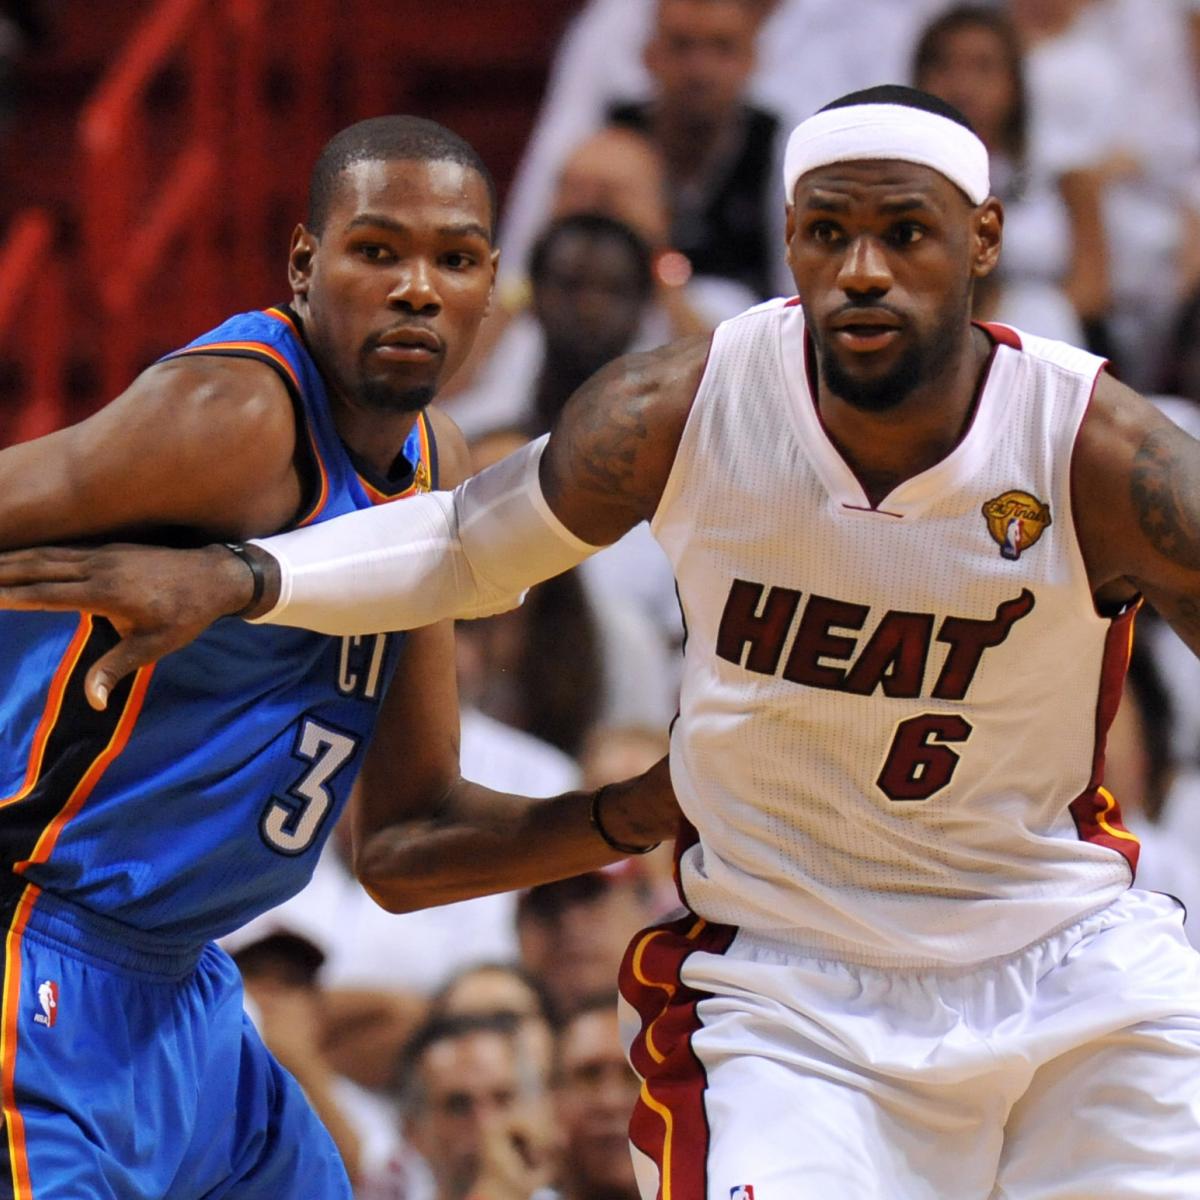 Fantasy Basketball Rankings: Top 5 Players at Every Position Entering